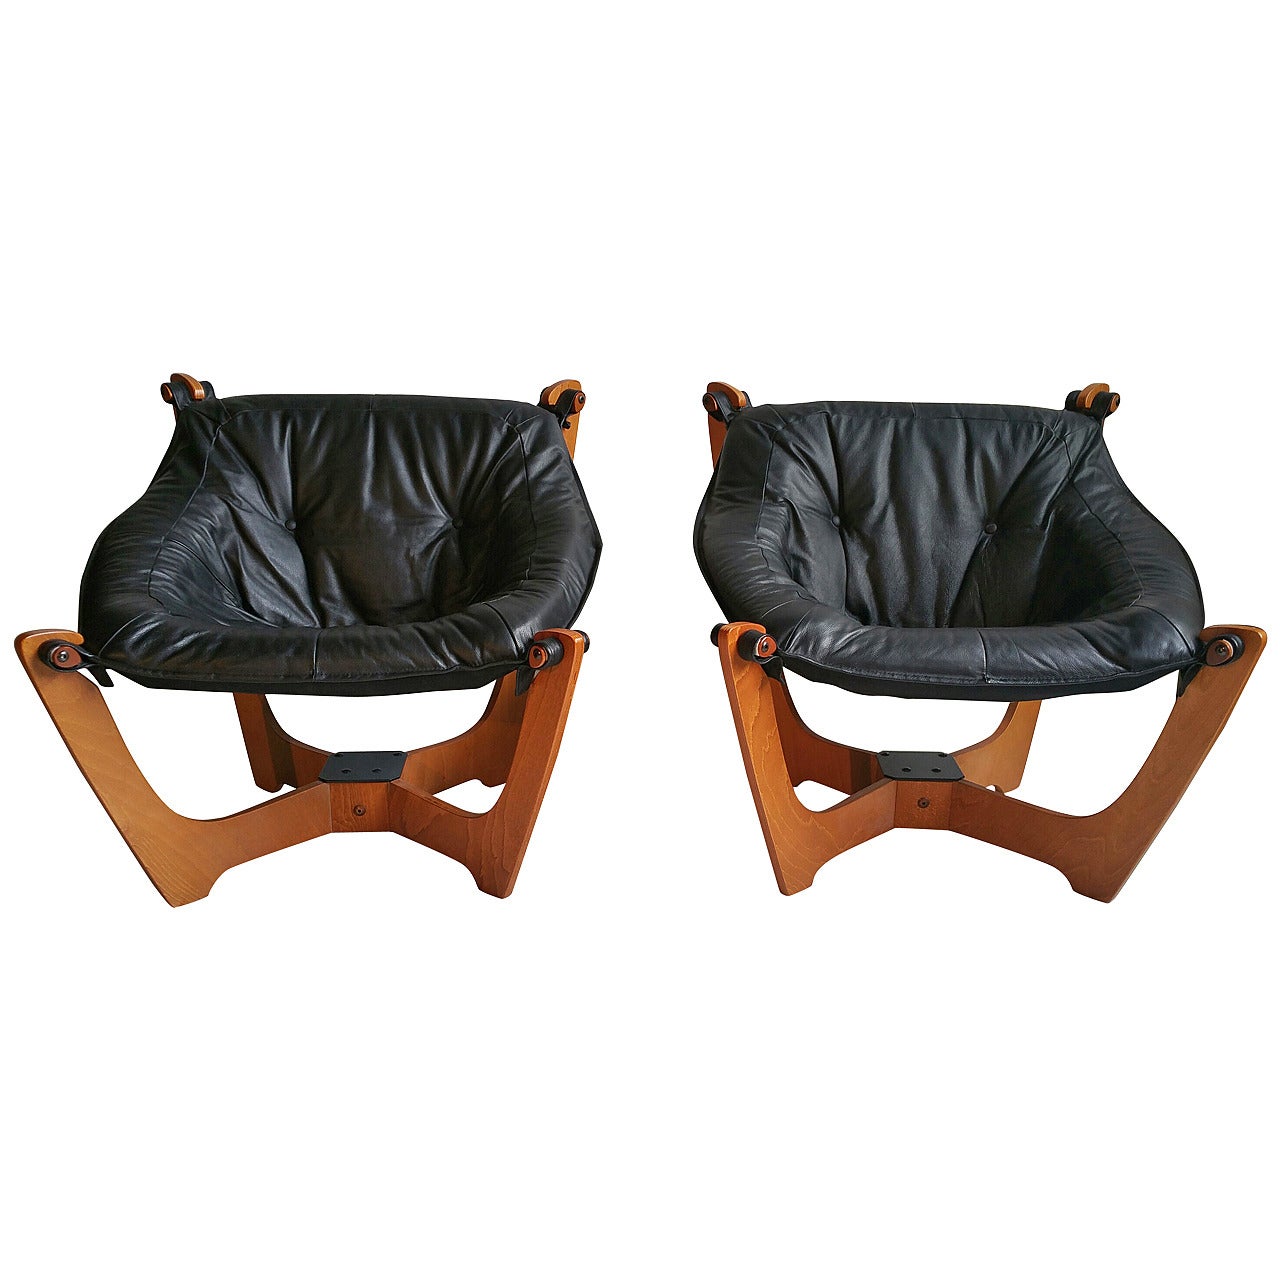 Pair of Vintage Danish Mid-Century Modern Møbler Luna Leather Sling Chairs